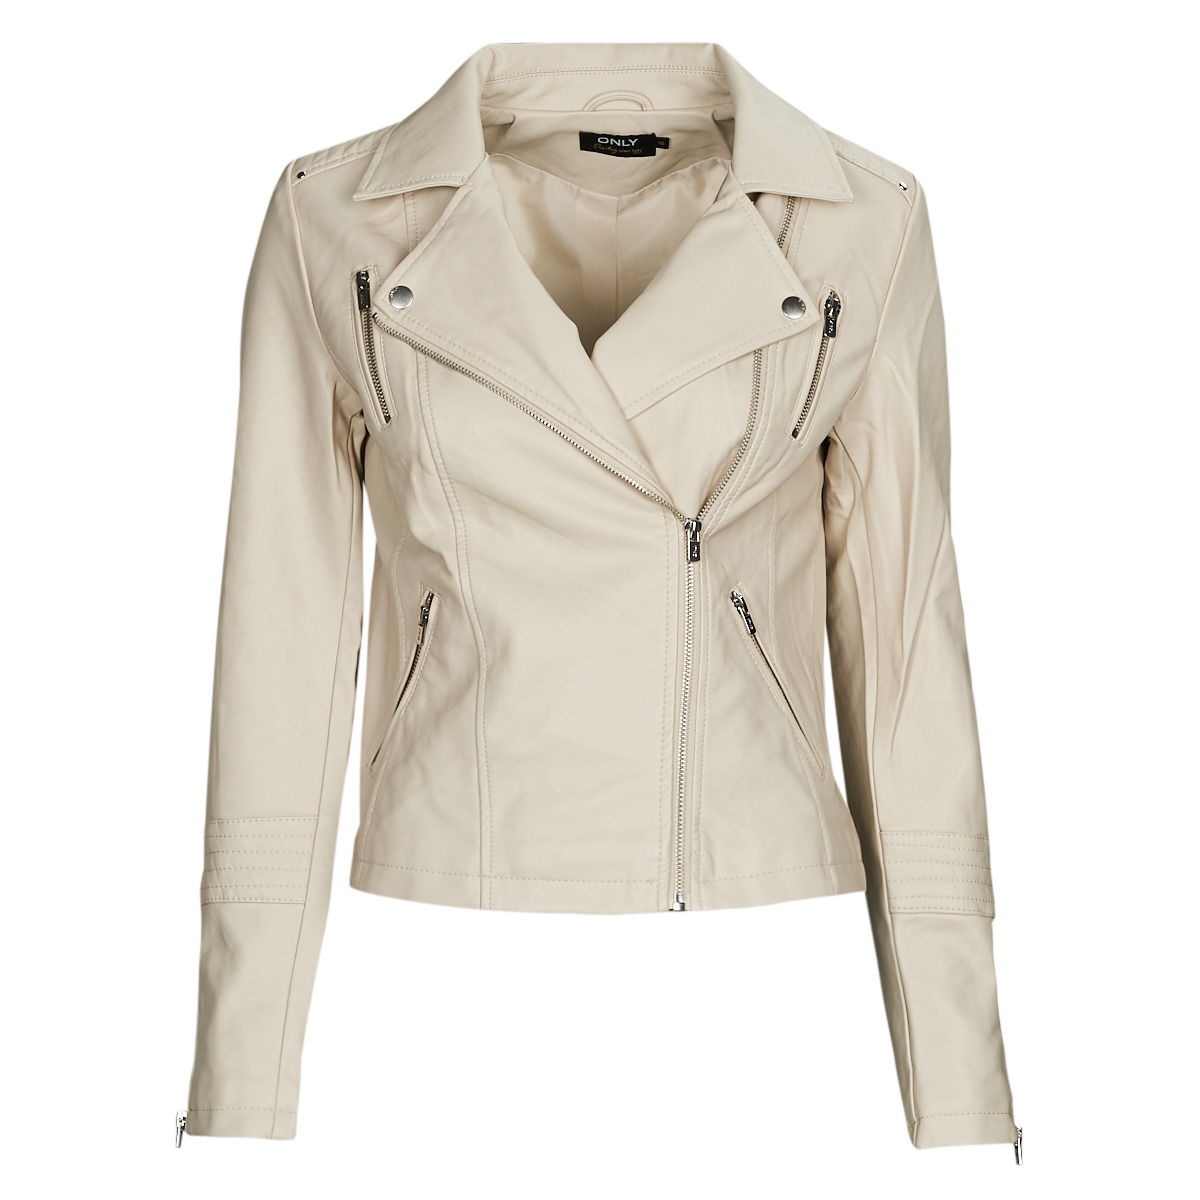 Only FAUX Spartoo Clothing LEATHER Imitation - Free ! delivery | Beige BIKER le OTW ONLGEMMA - NOOS Leather NET Women / jackets